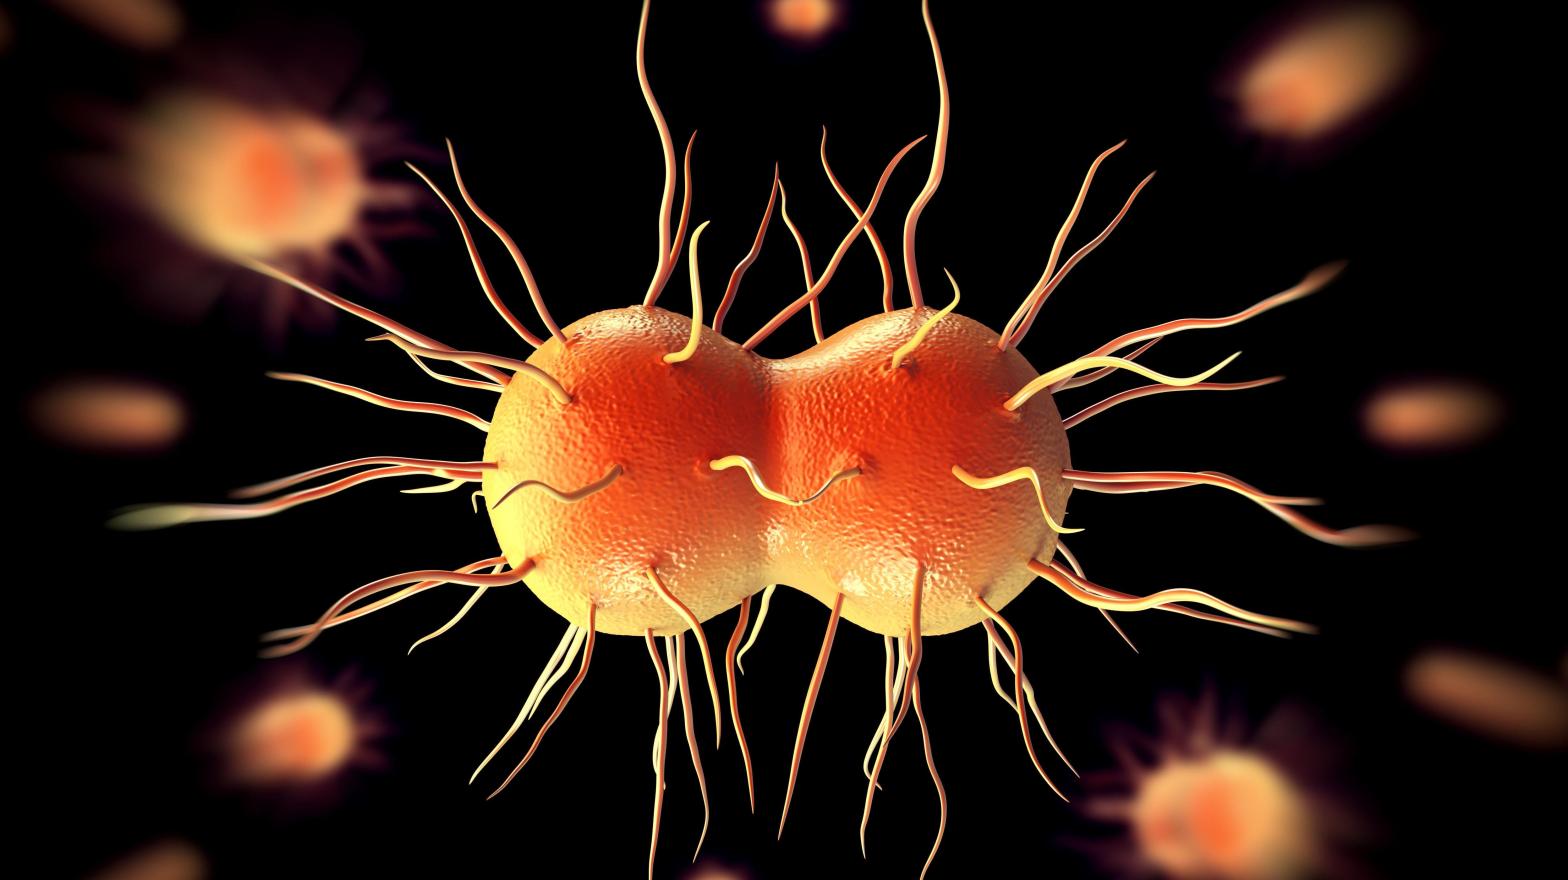 An illustration of Neisseria gonorrhoeae bacteria. (Illustration: Shutterstock, Shutterstock)